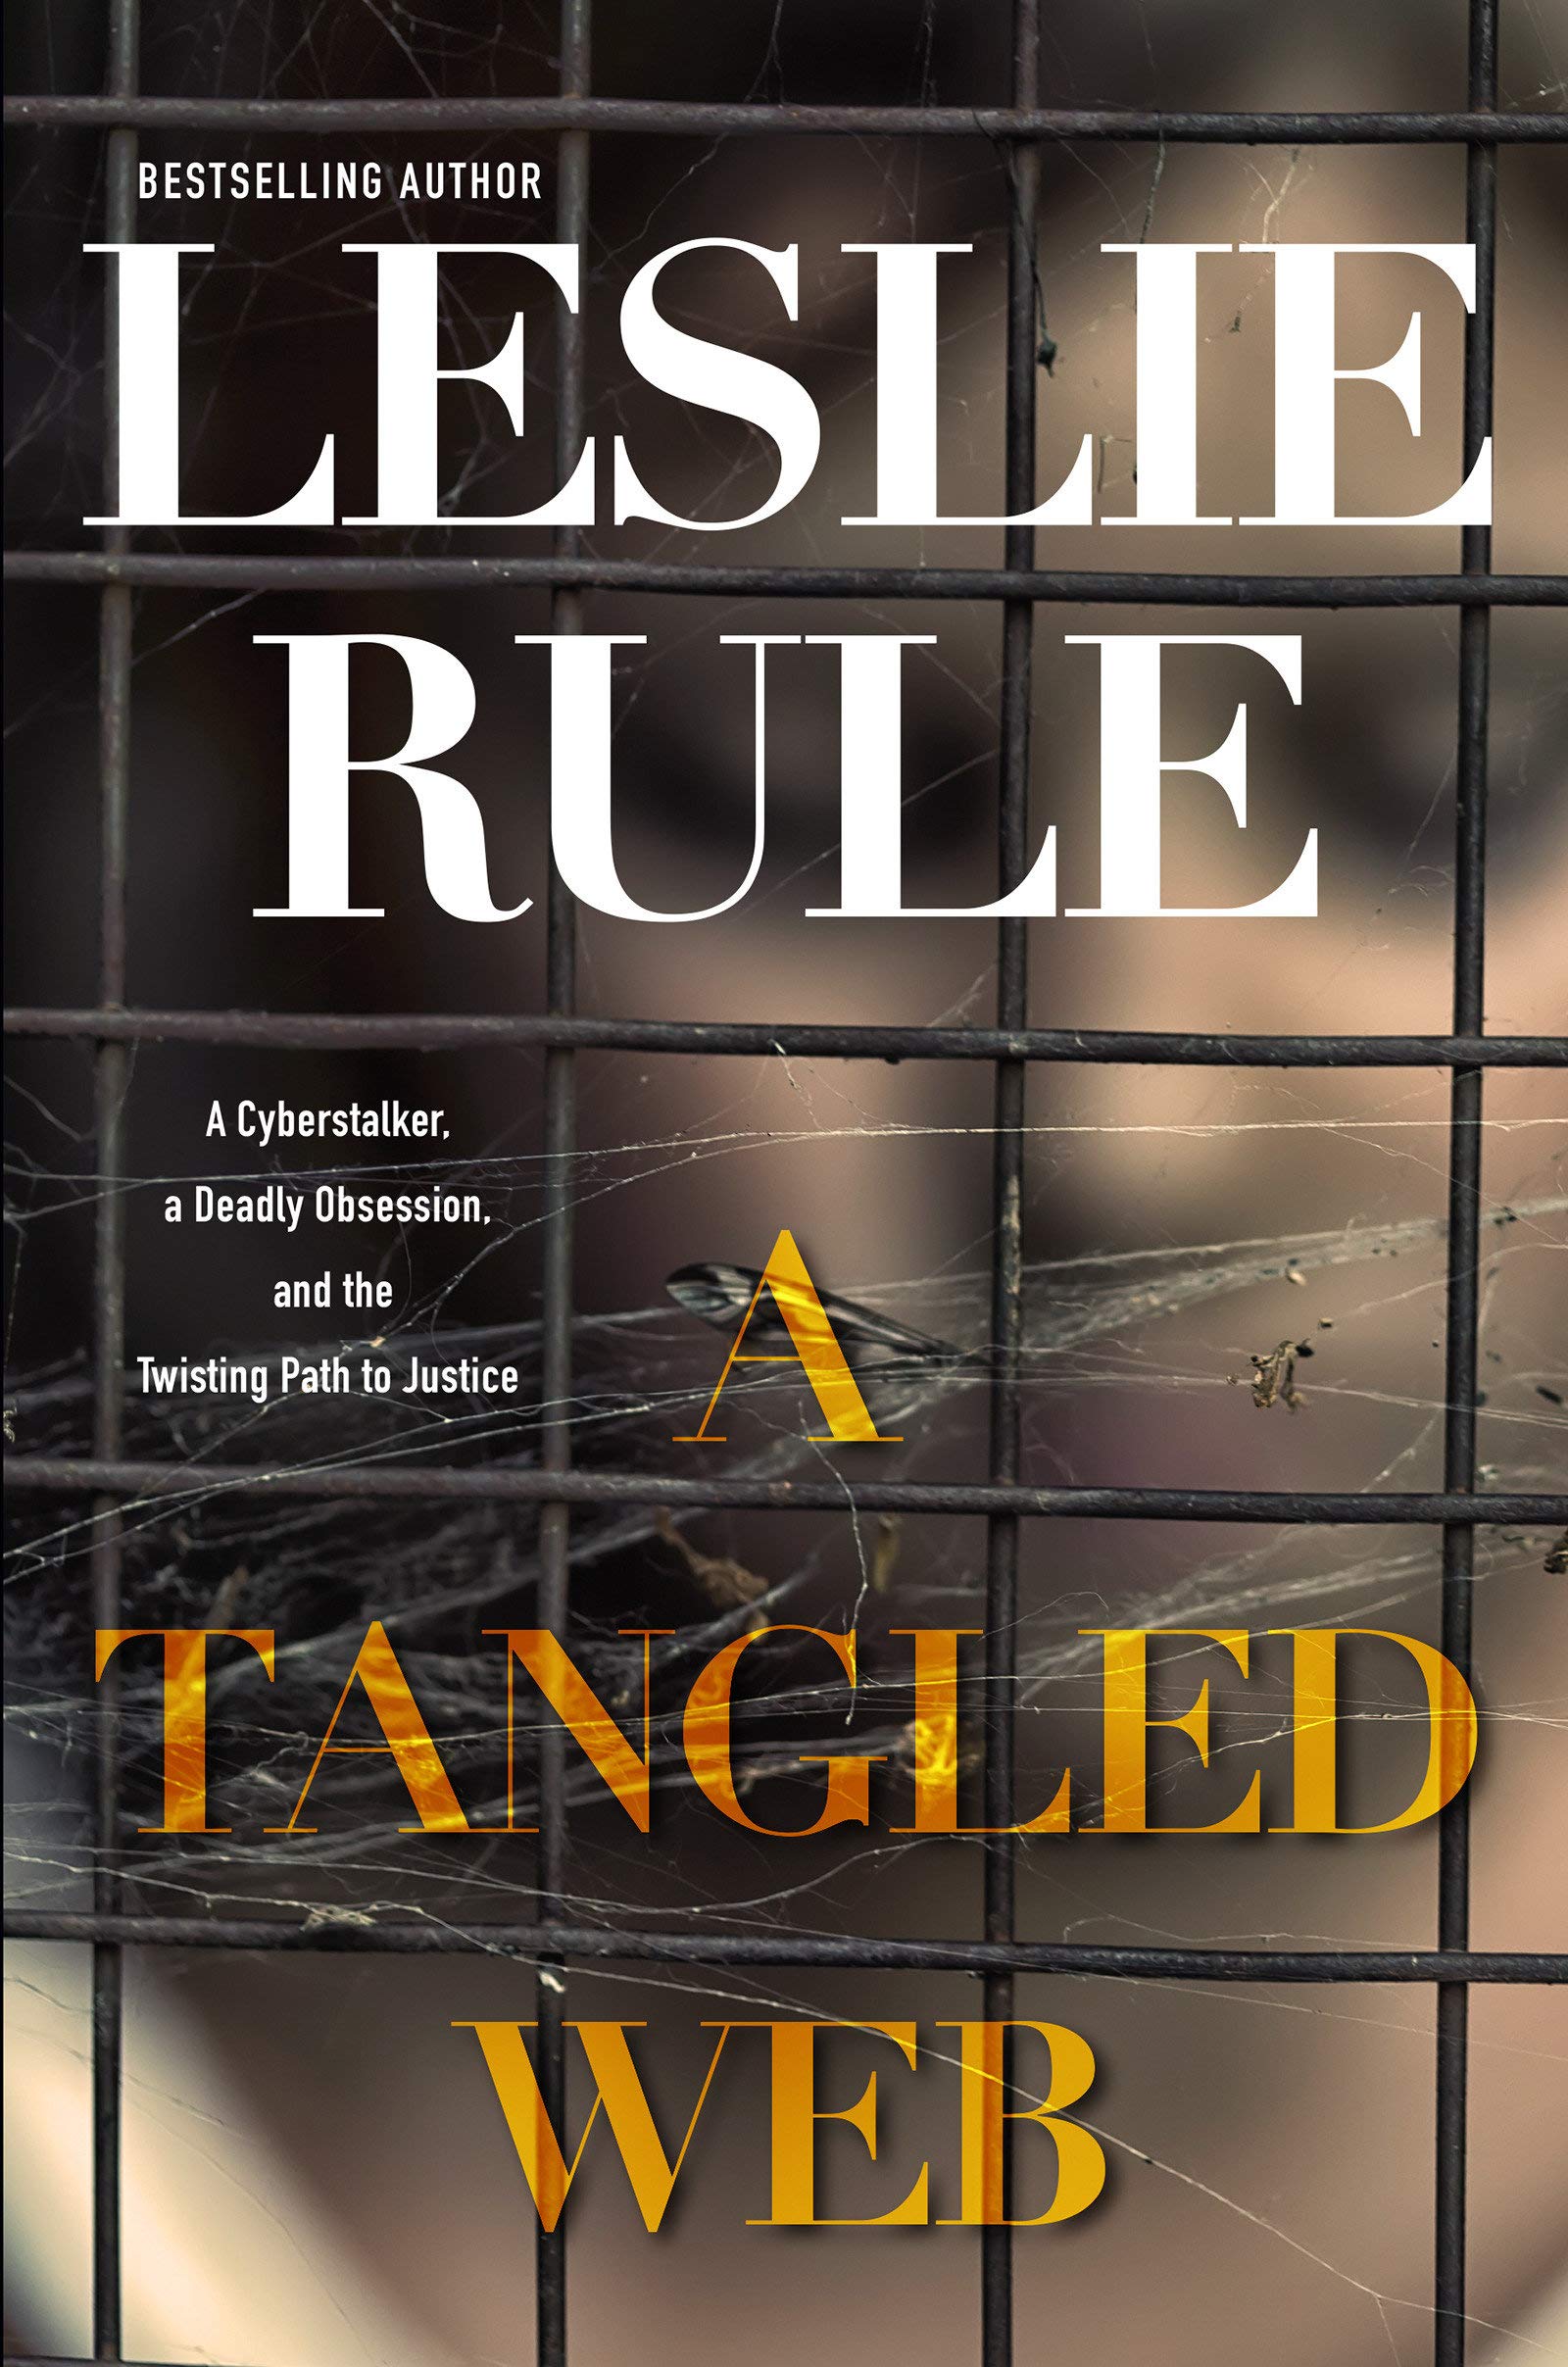 Image for "A Tangled Web"